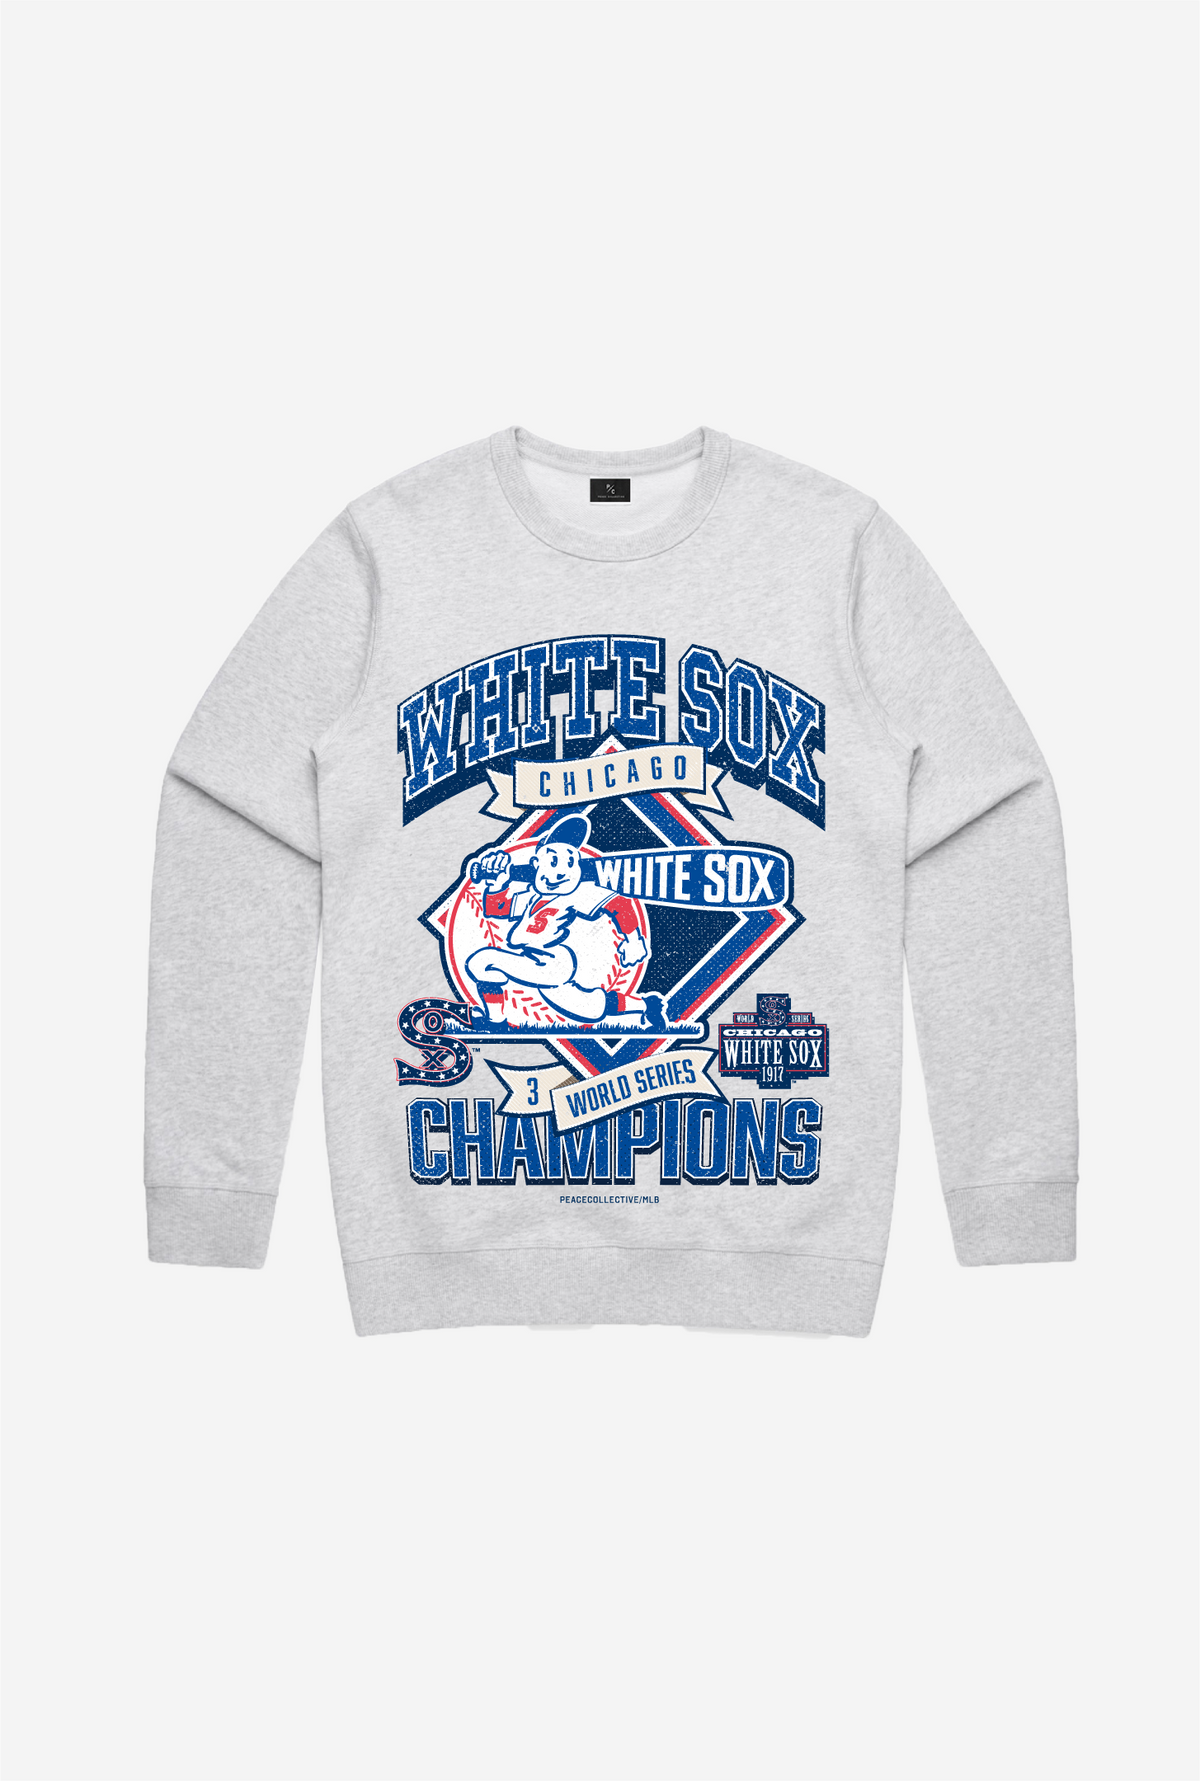 Chicago White Sox Vintage Cooperstown Collection Crewneck - Ash